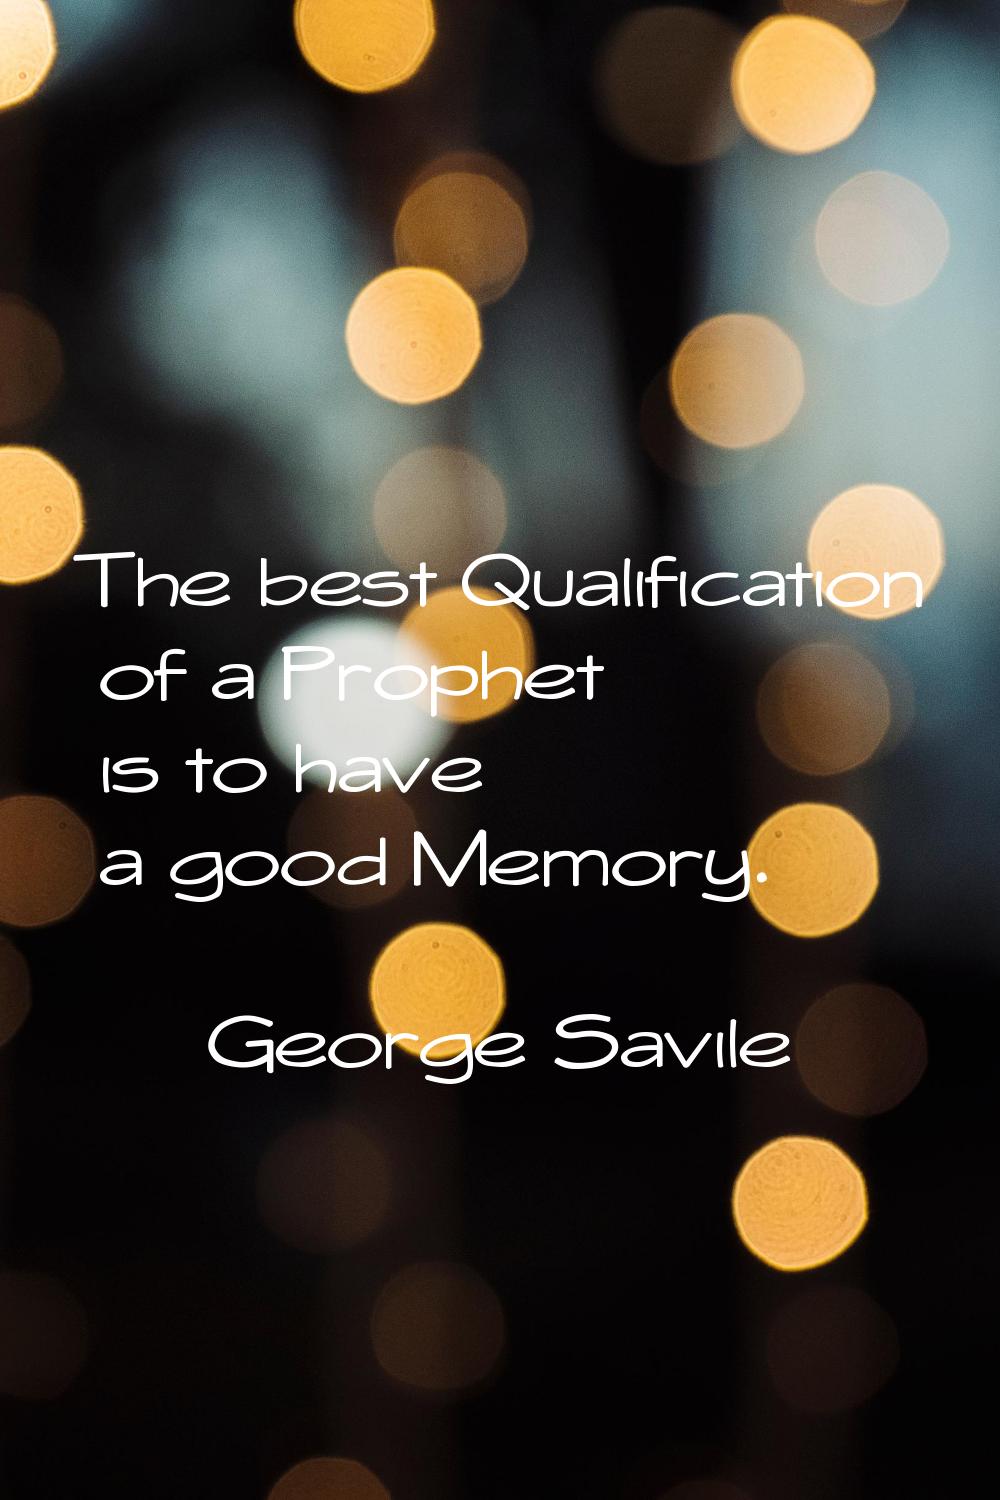 The best Qualification of a Prophet is to have a good Memory.